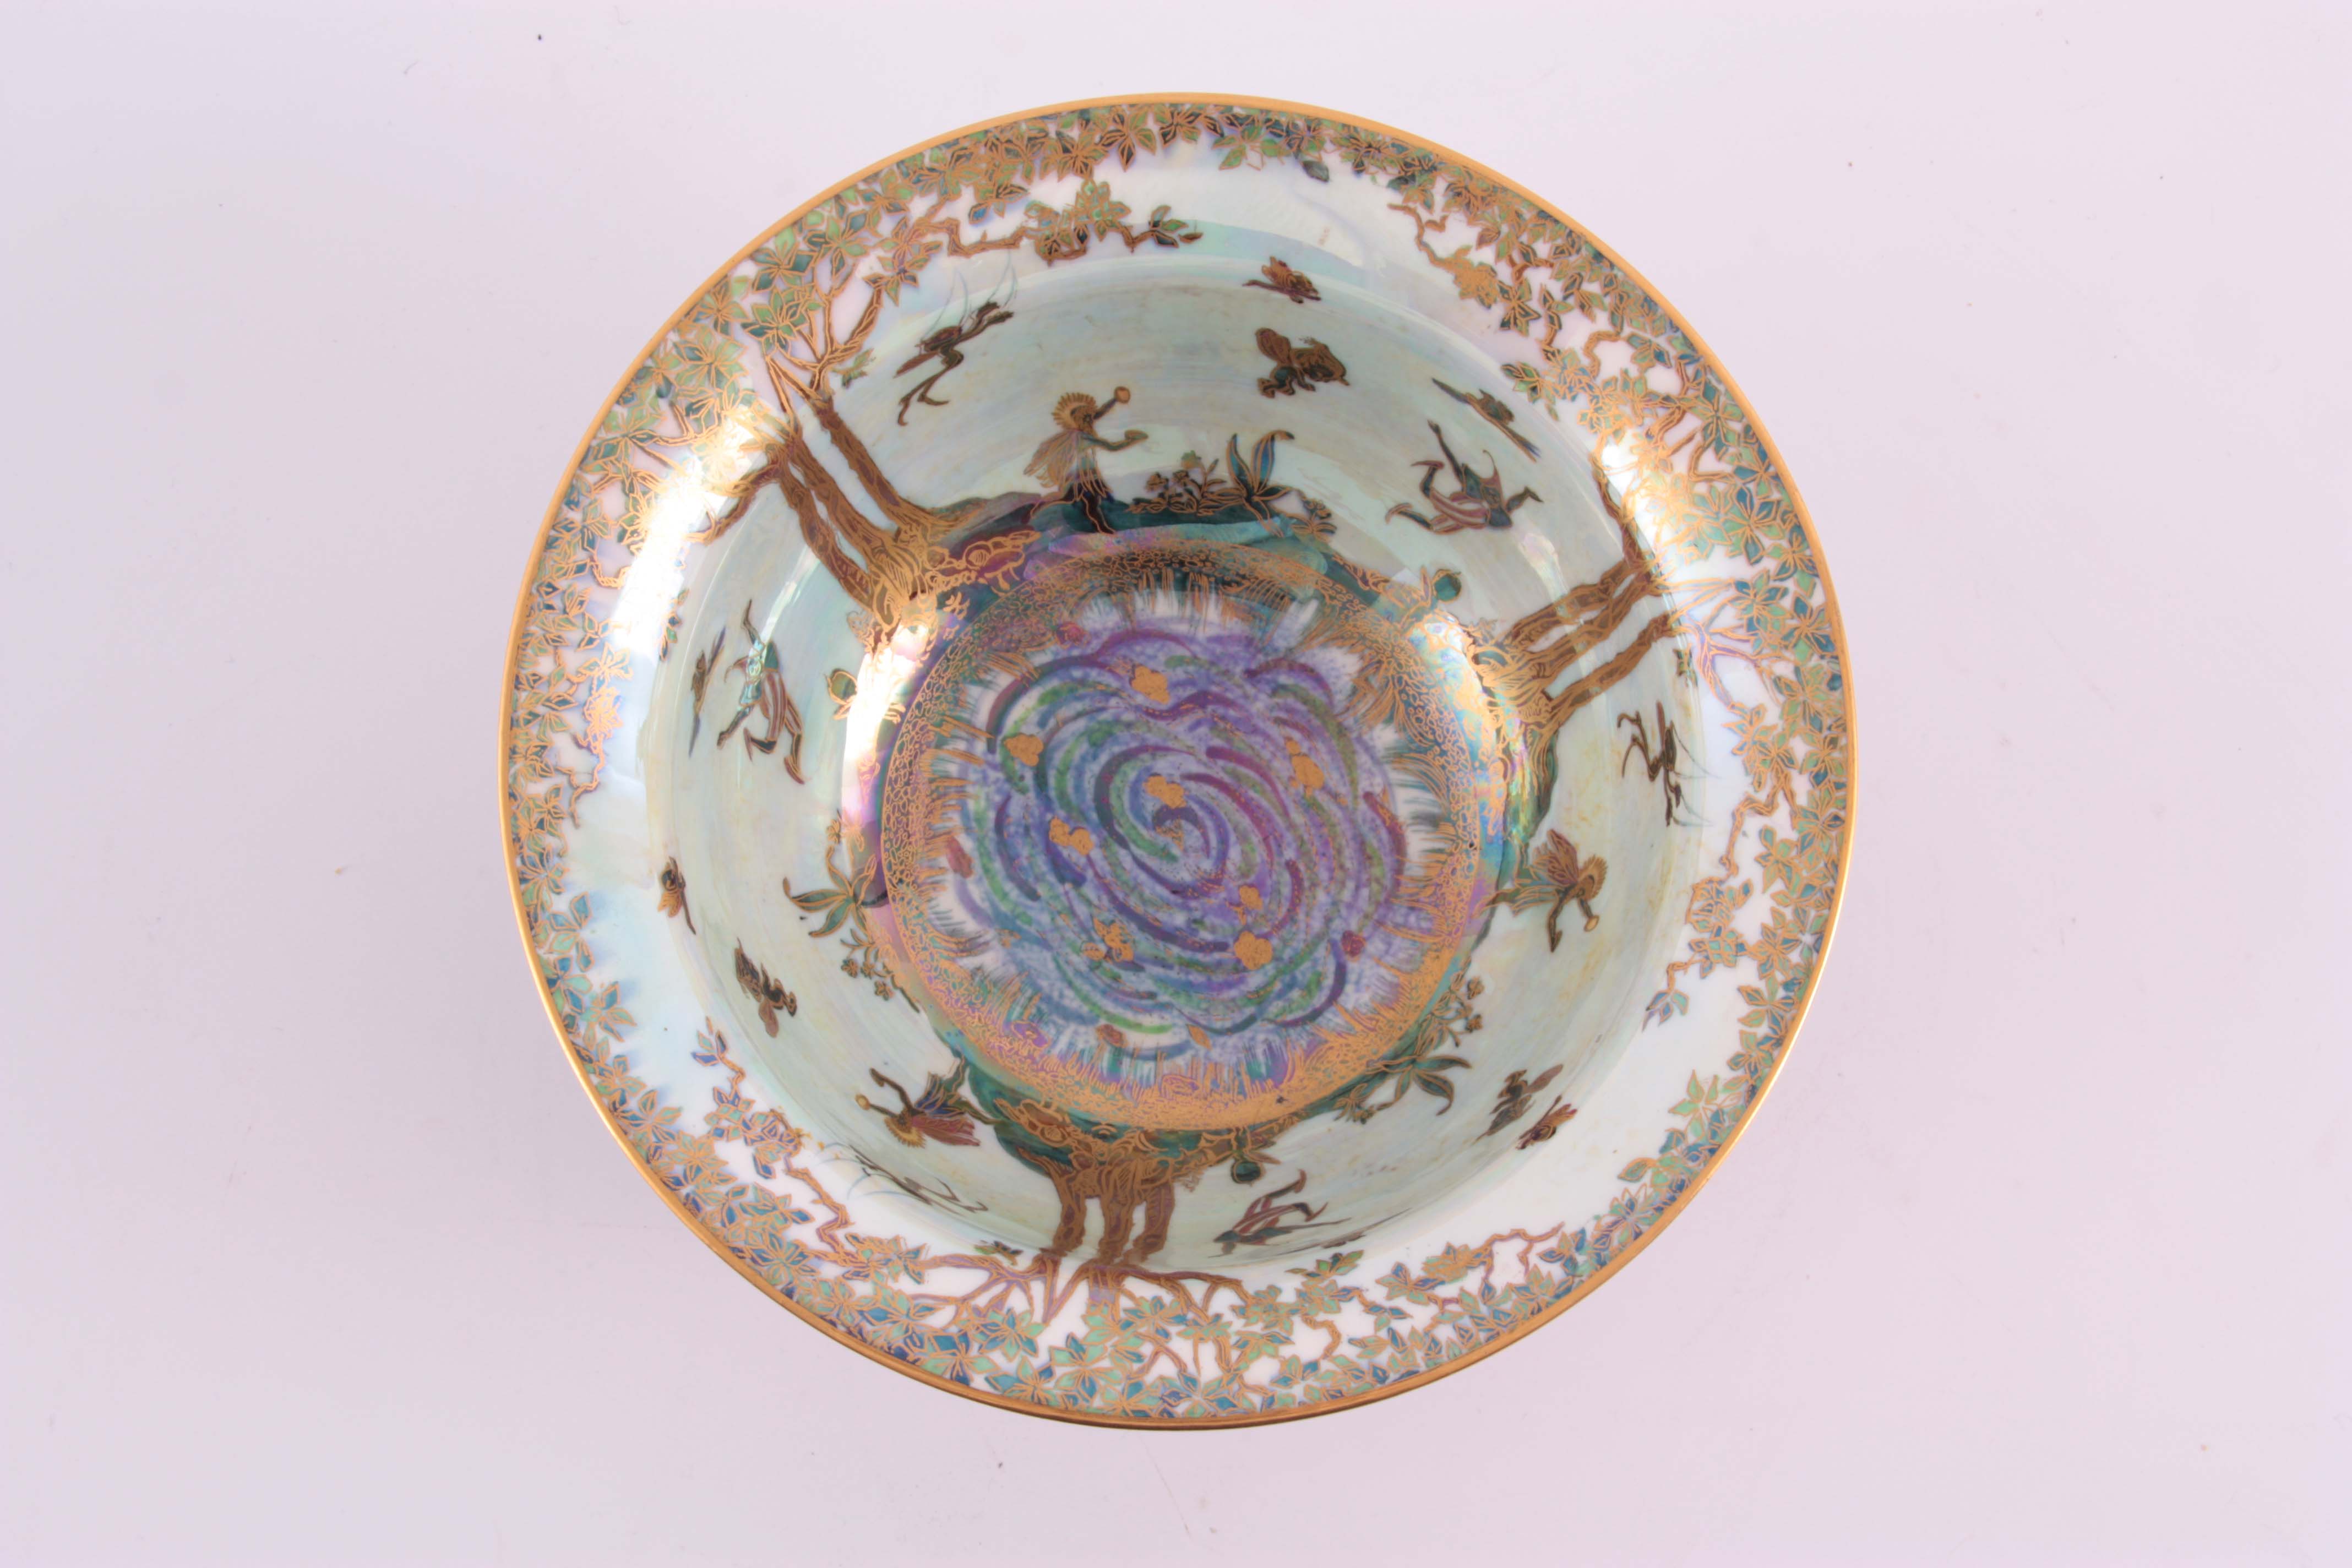 A FINE WEDGWOOD FAIRYLAND LUSTRE FOOTED BOWL WITH EVERTED RIM AFTER DESIGNS BY DAISY MAKEIG JONES - Image 4 of 7